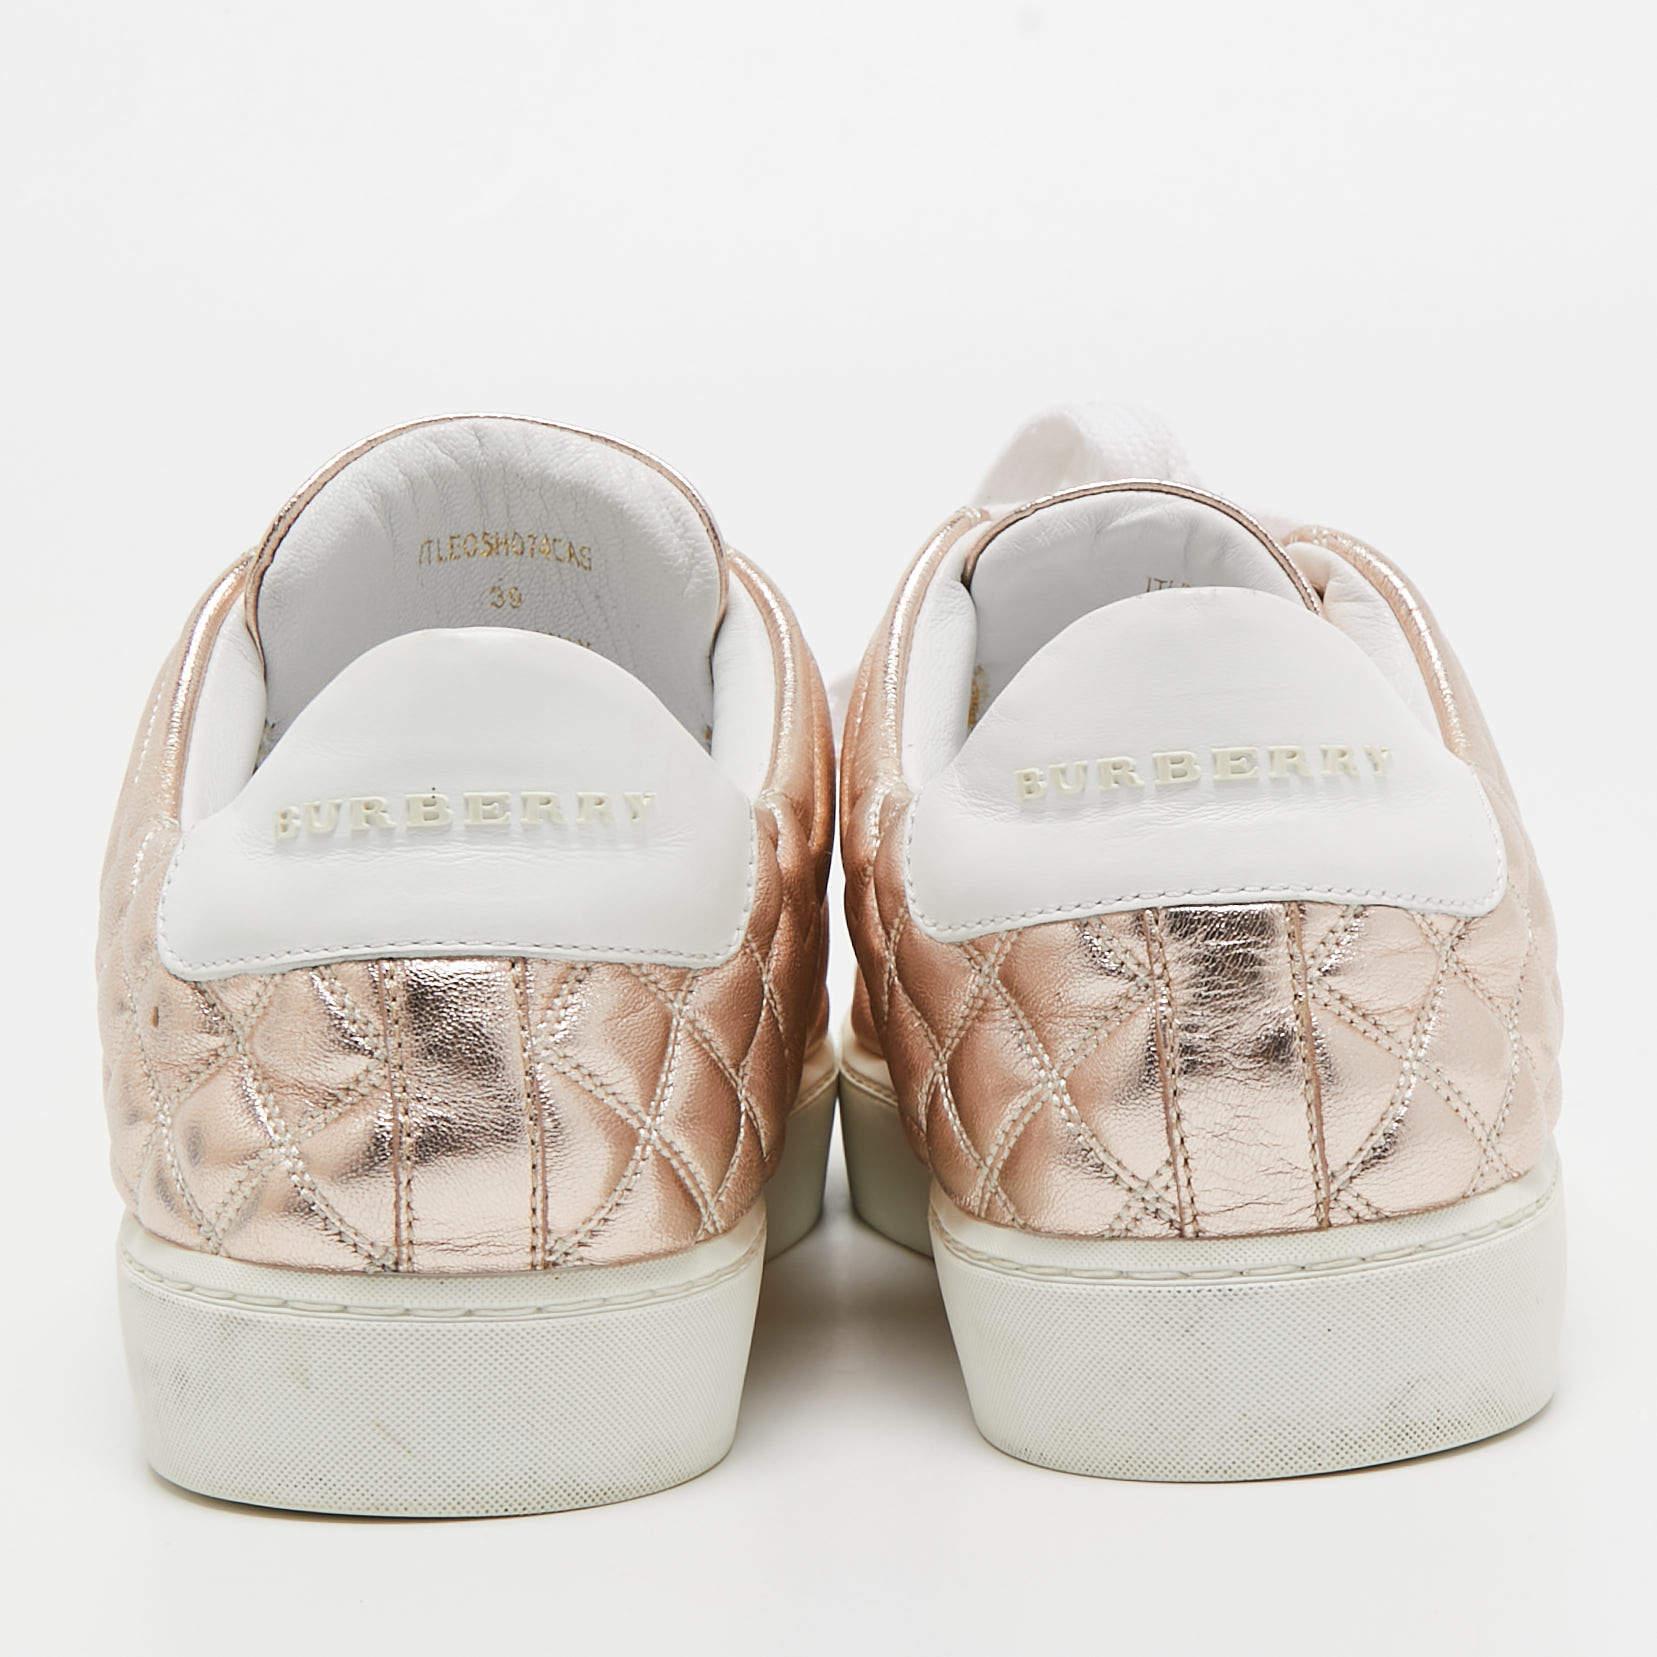 Burberry Metallic Pink Quilted Leather Westford Low Top Sneakers Size 39 In Excellent Condition For Sale In Dubai, Al Qouz 2